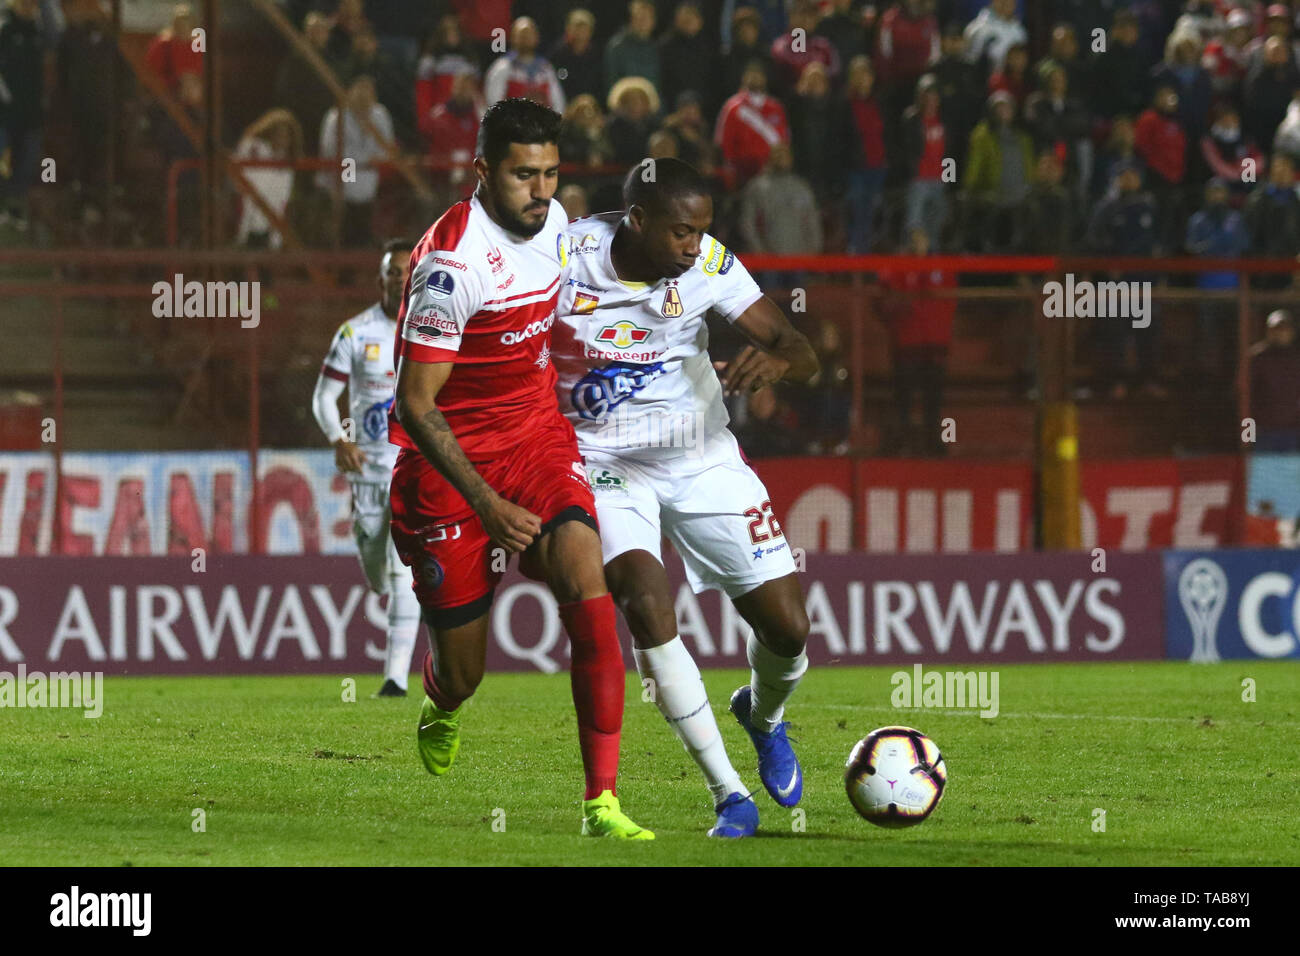 BUENOS AIRES, 23.05.2019: Jonathan Galvan during the match between Argentinos Juniors and Deportes Tolima for the 2nd round of Conmebol Sudamericana C Stock Photo